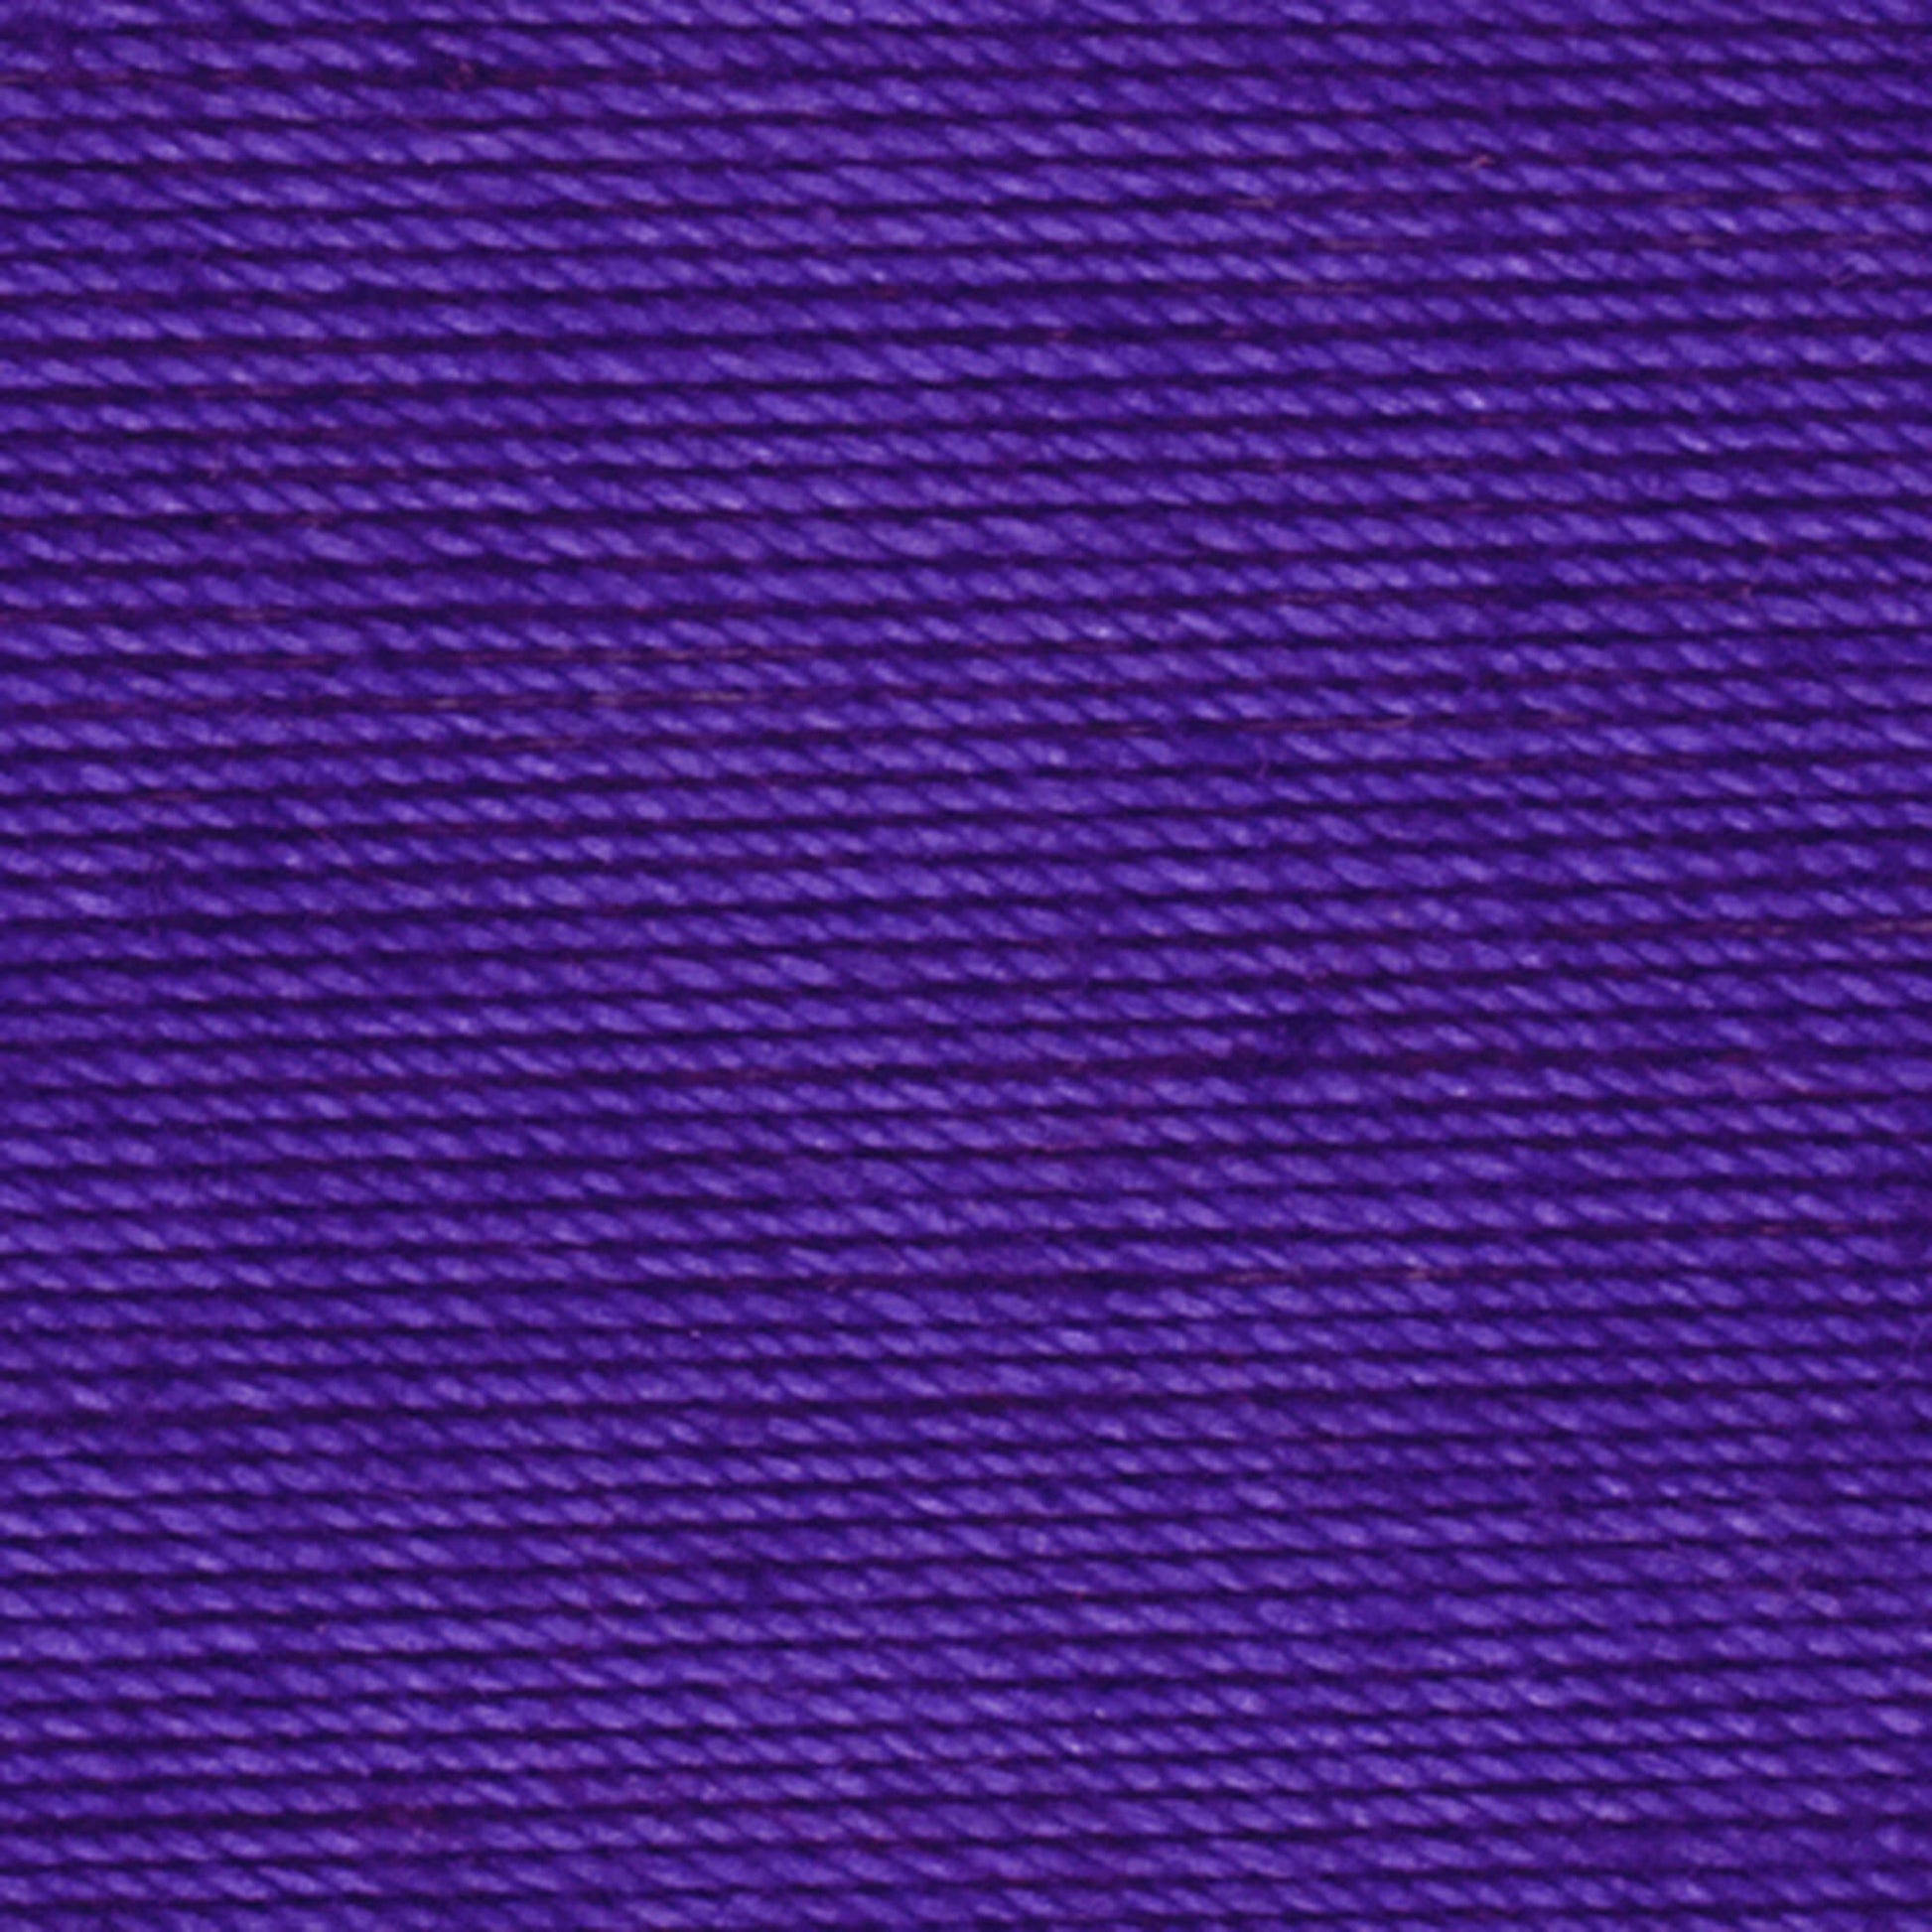 Aunt Lydia's Classic Crochet Thread Size 10 - Clearance shades Violet